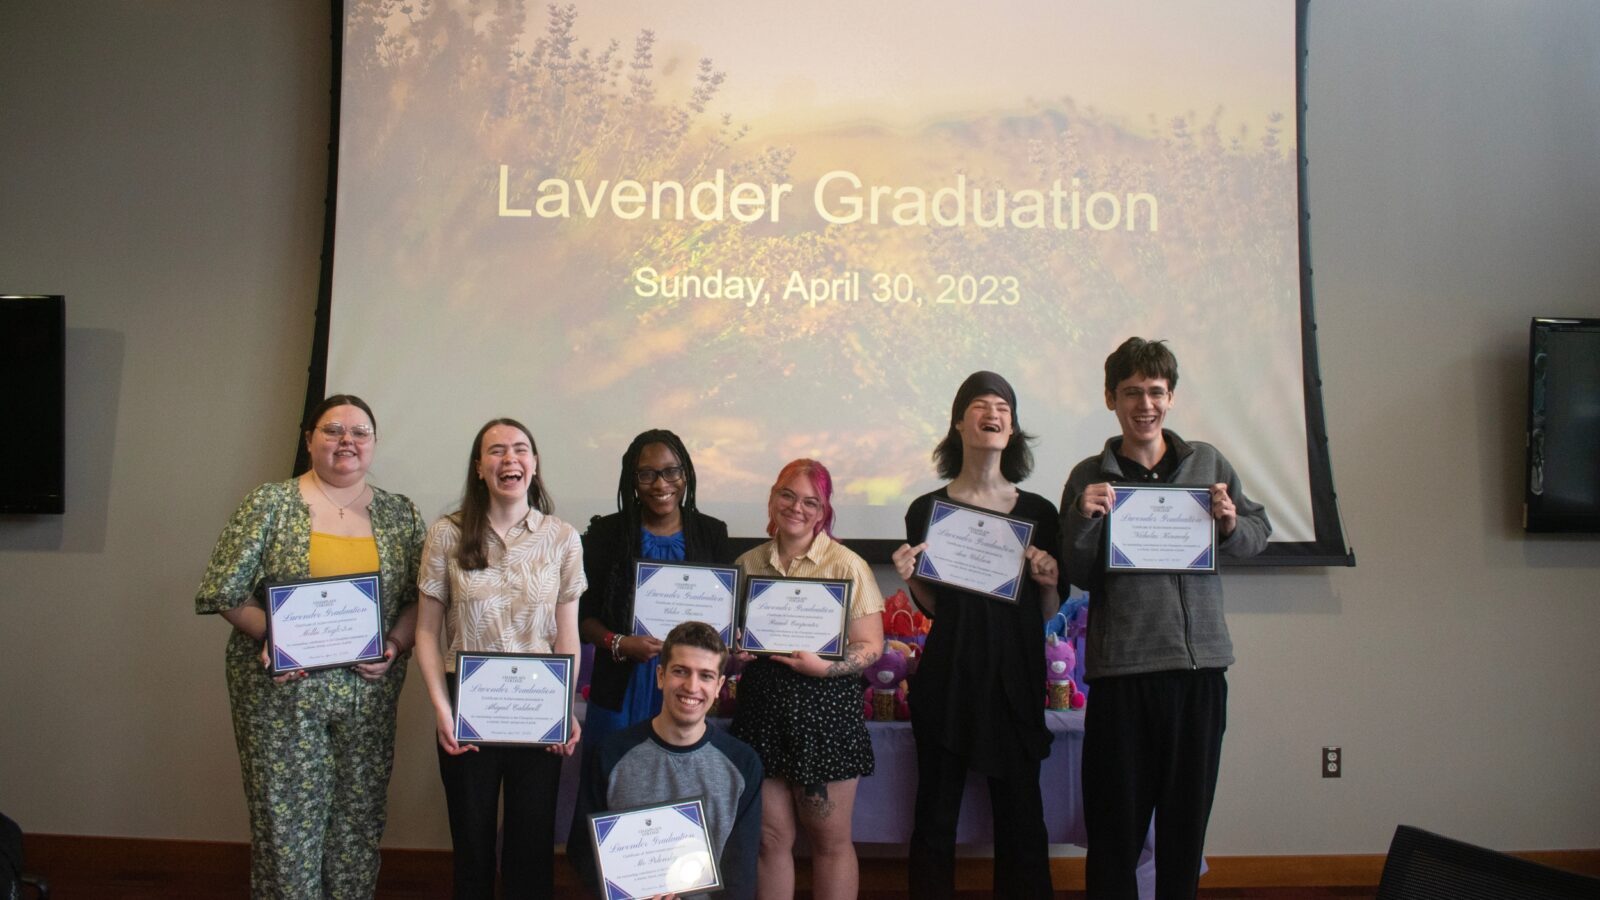 seven students hold framed certificates in front of a projector screen reading "lavender graduation sunday, april 30, 2023"